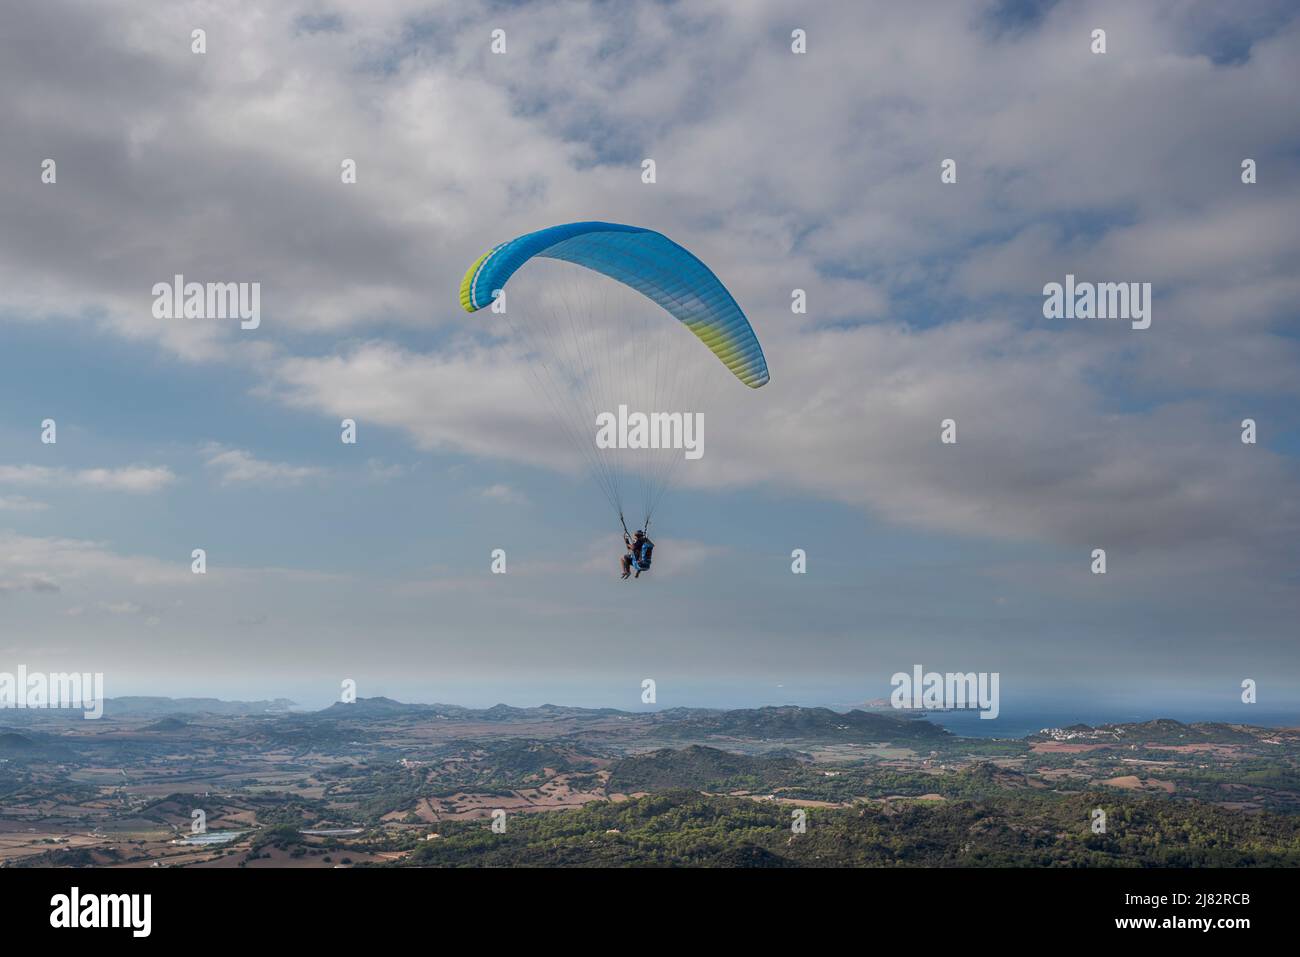 First flight with a tandem paragliding instructor. Photo taken from the El Toro lookout point, municipality of Es Mercadal, Menorca, Spain Stock Photo